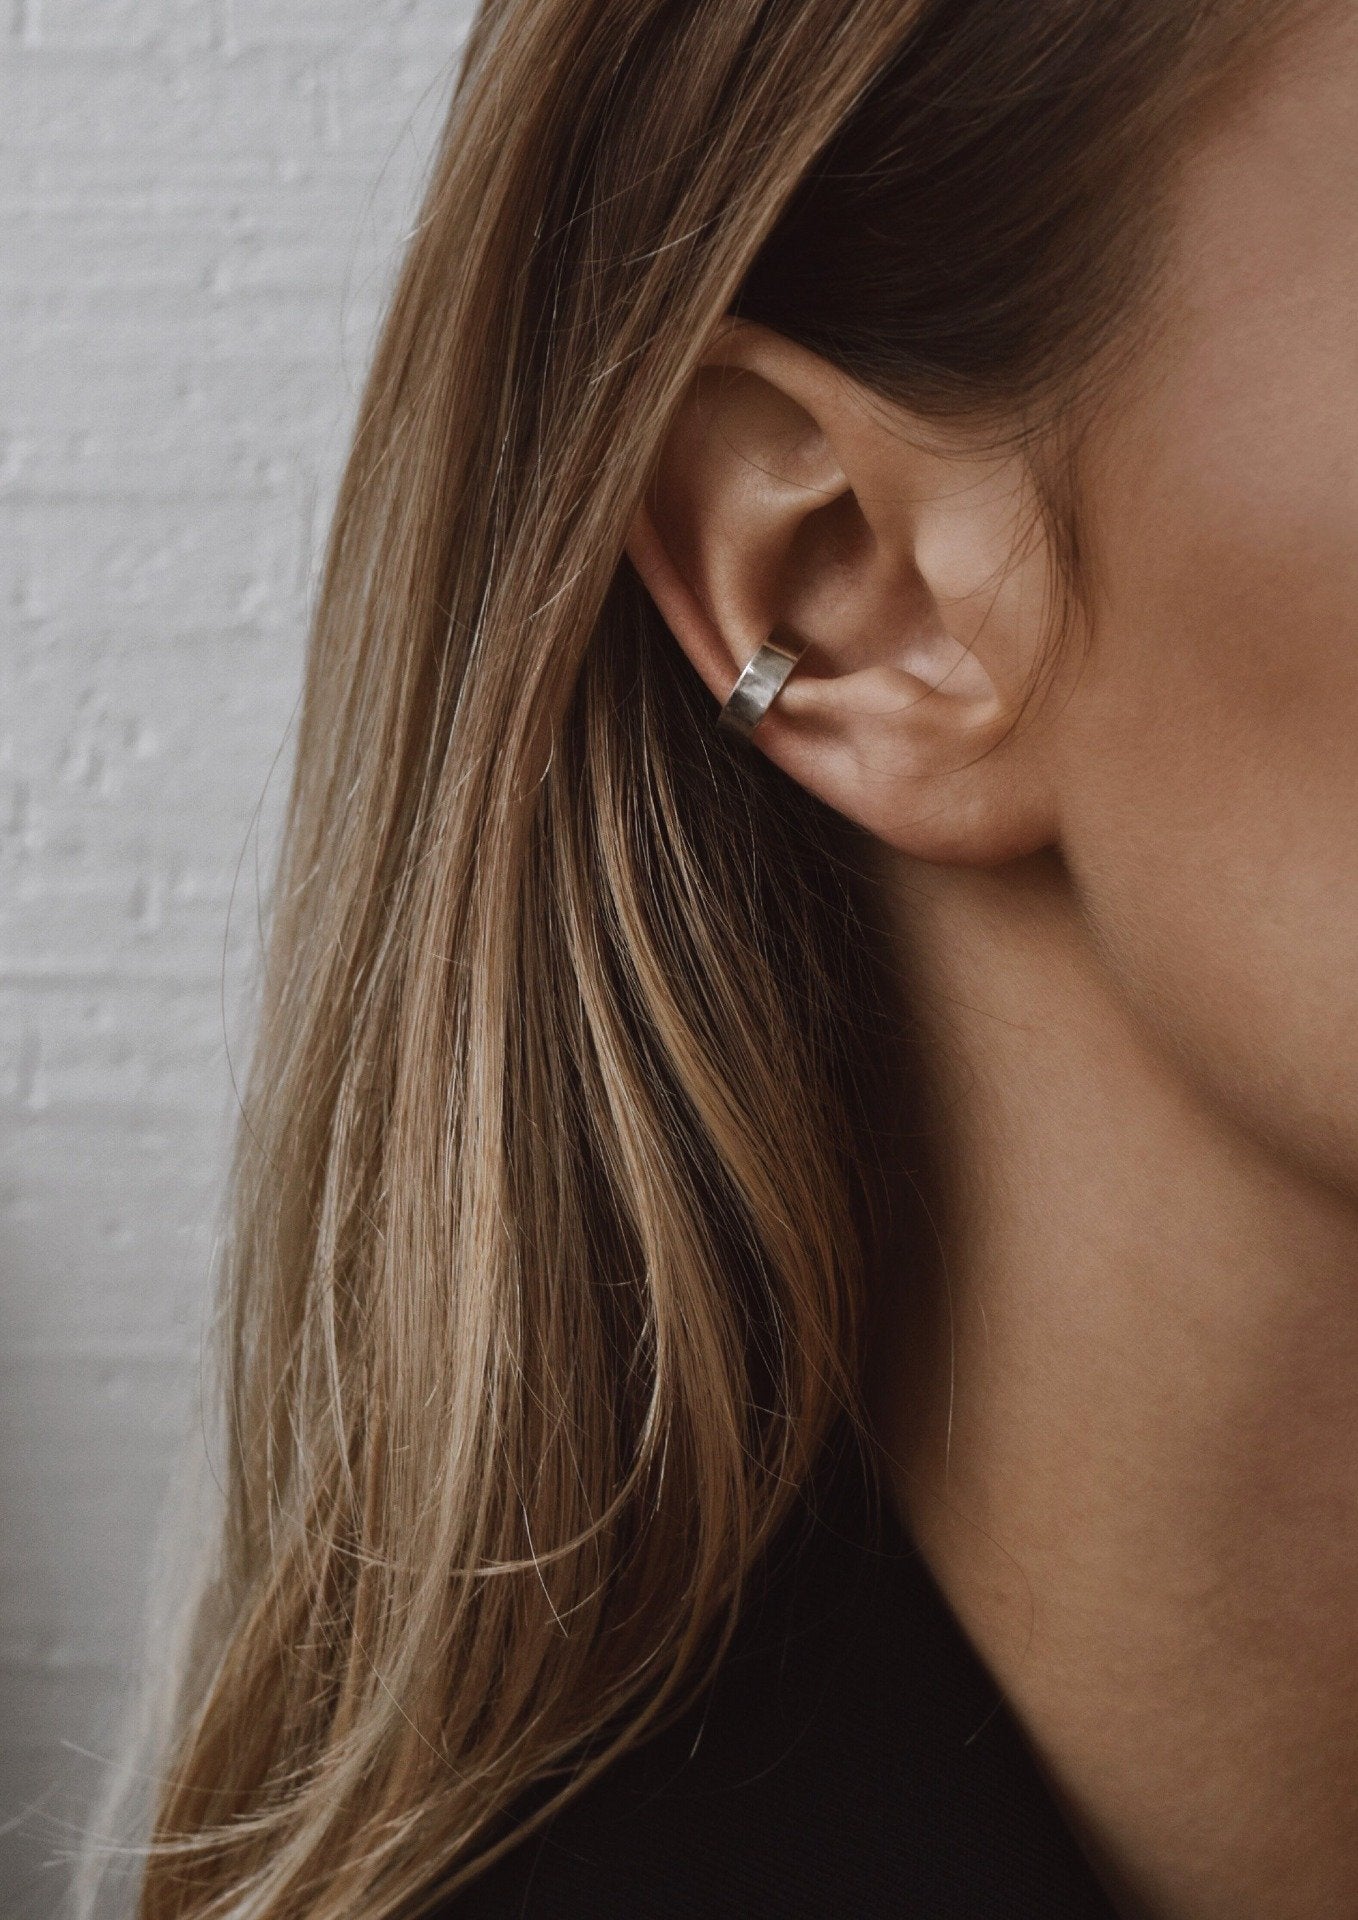 NO MORE accessories Flat Ear Cuff in Sterling Silver.